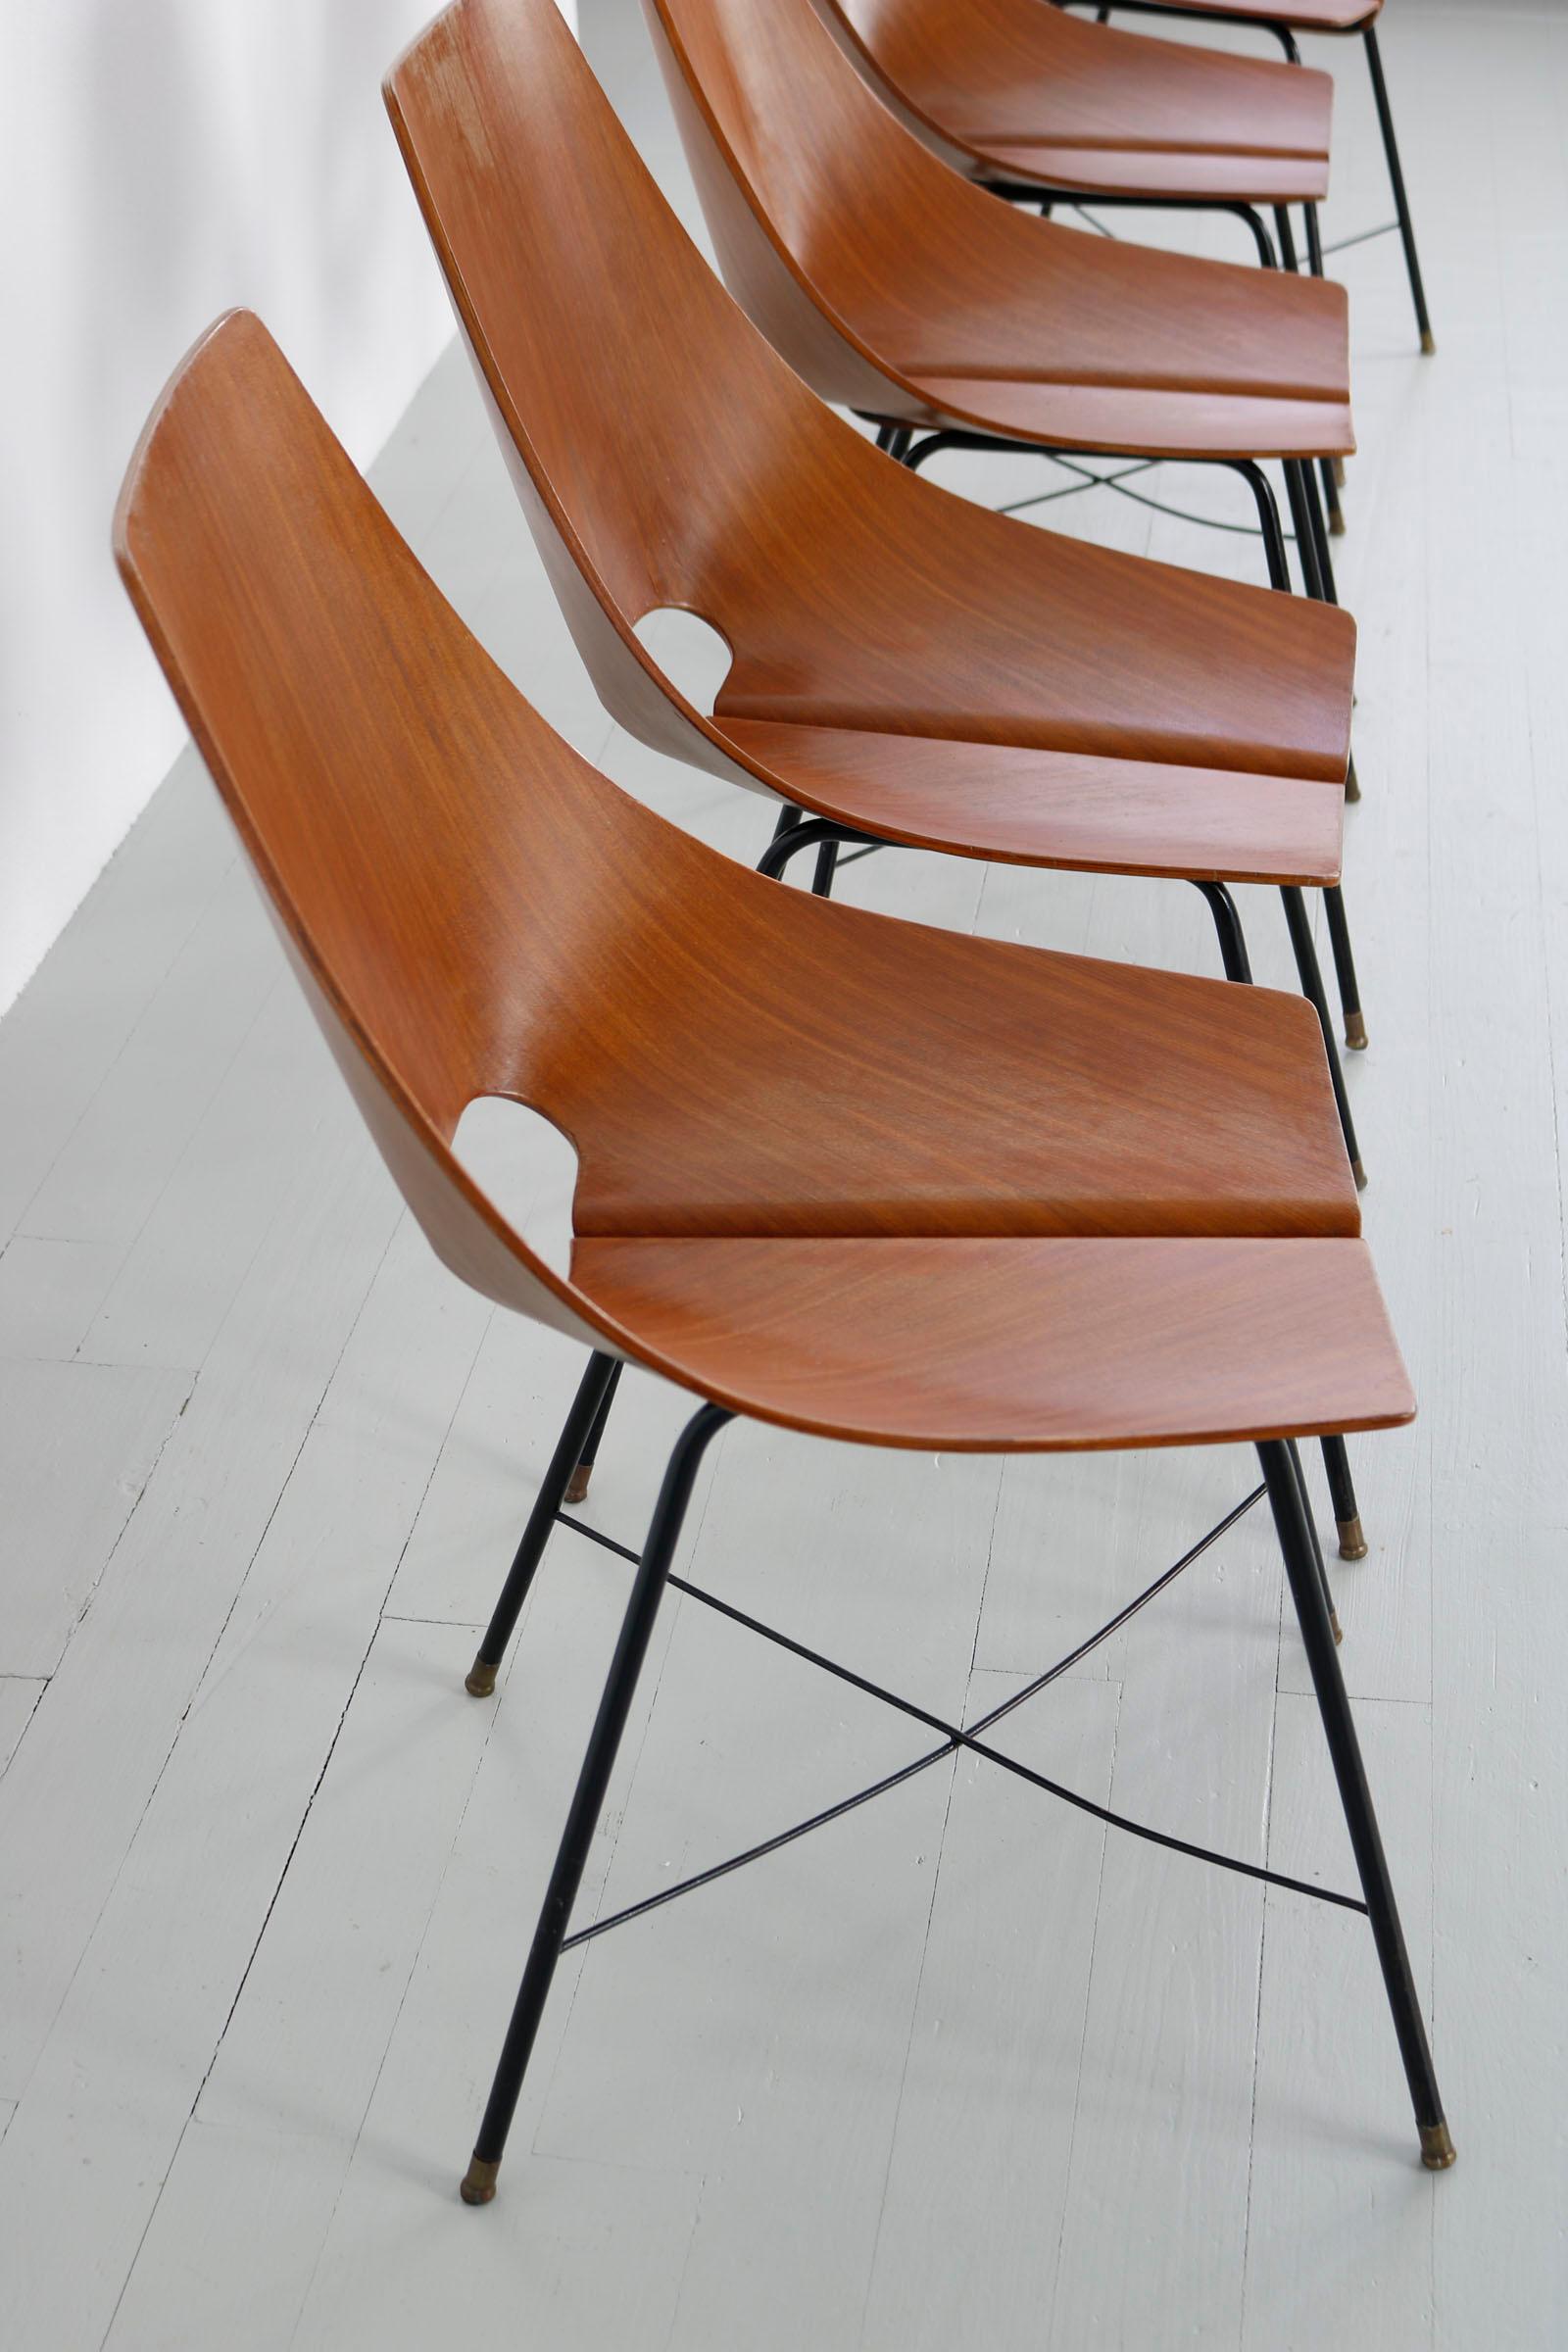 Set of 6 Bentwood Side Chairs by Societa Compensati Curvati, Italy For Sale 10